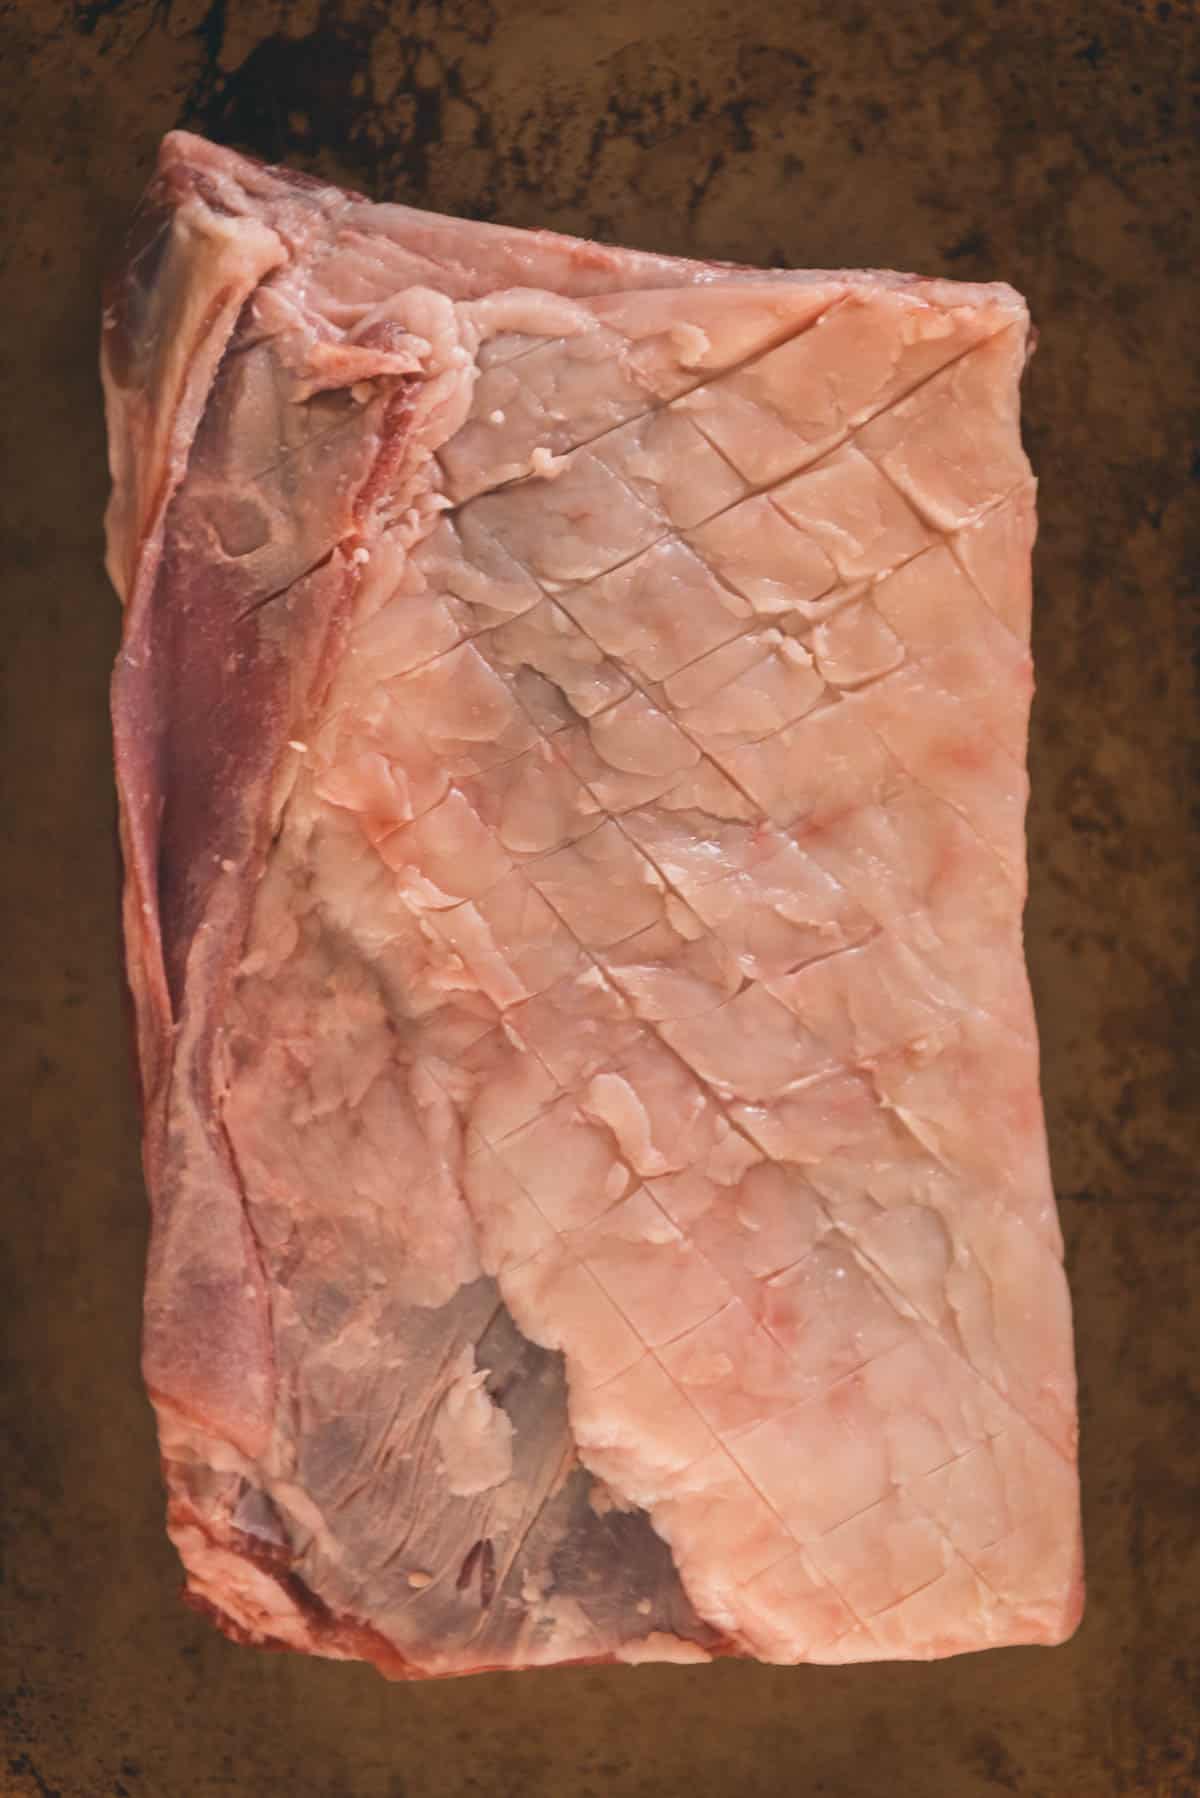 Close up of the fat to show the shallow knife cuts to score the meat.